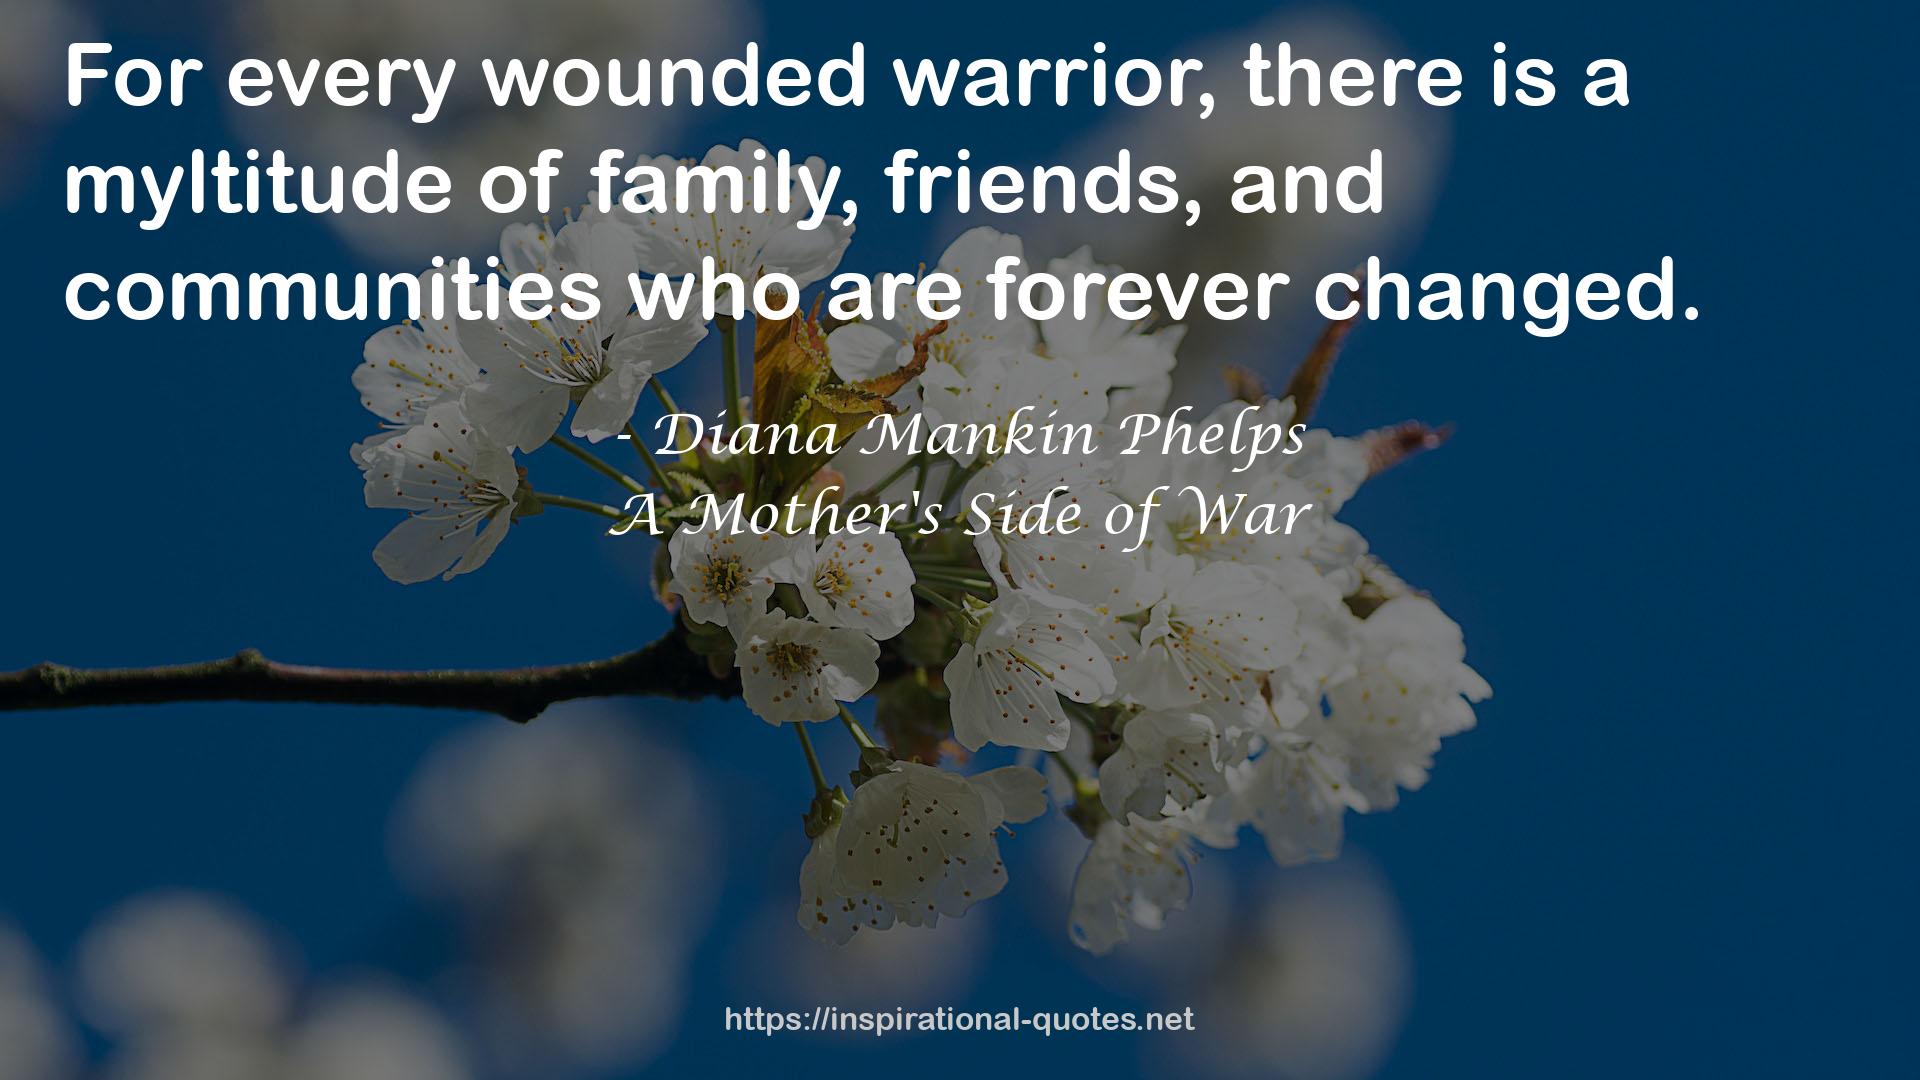 A Mother's Side of War QUOTES